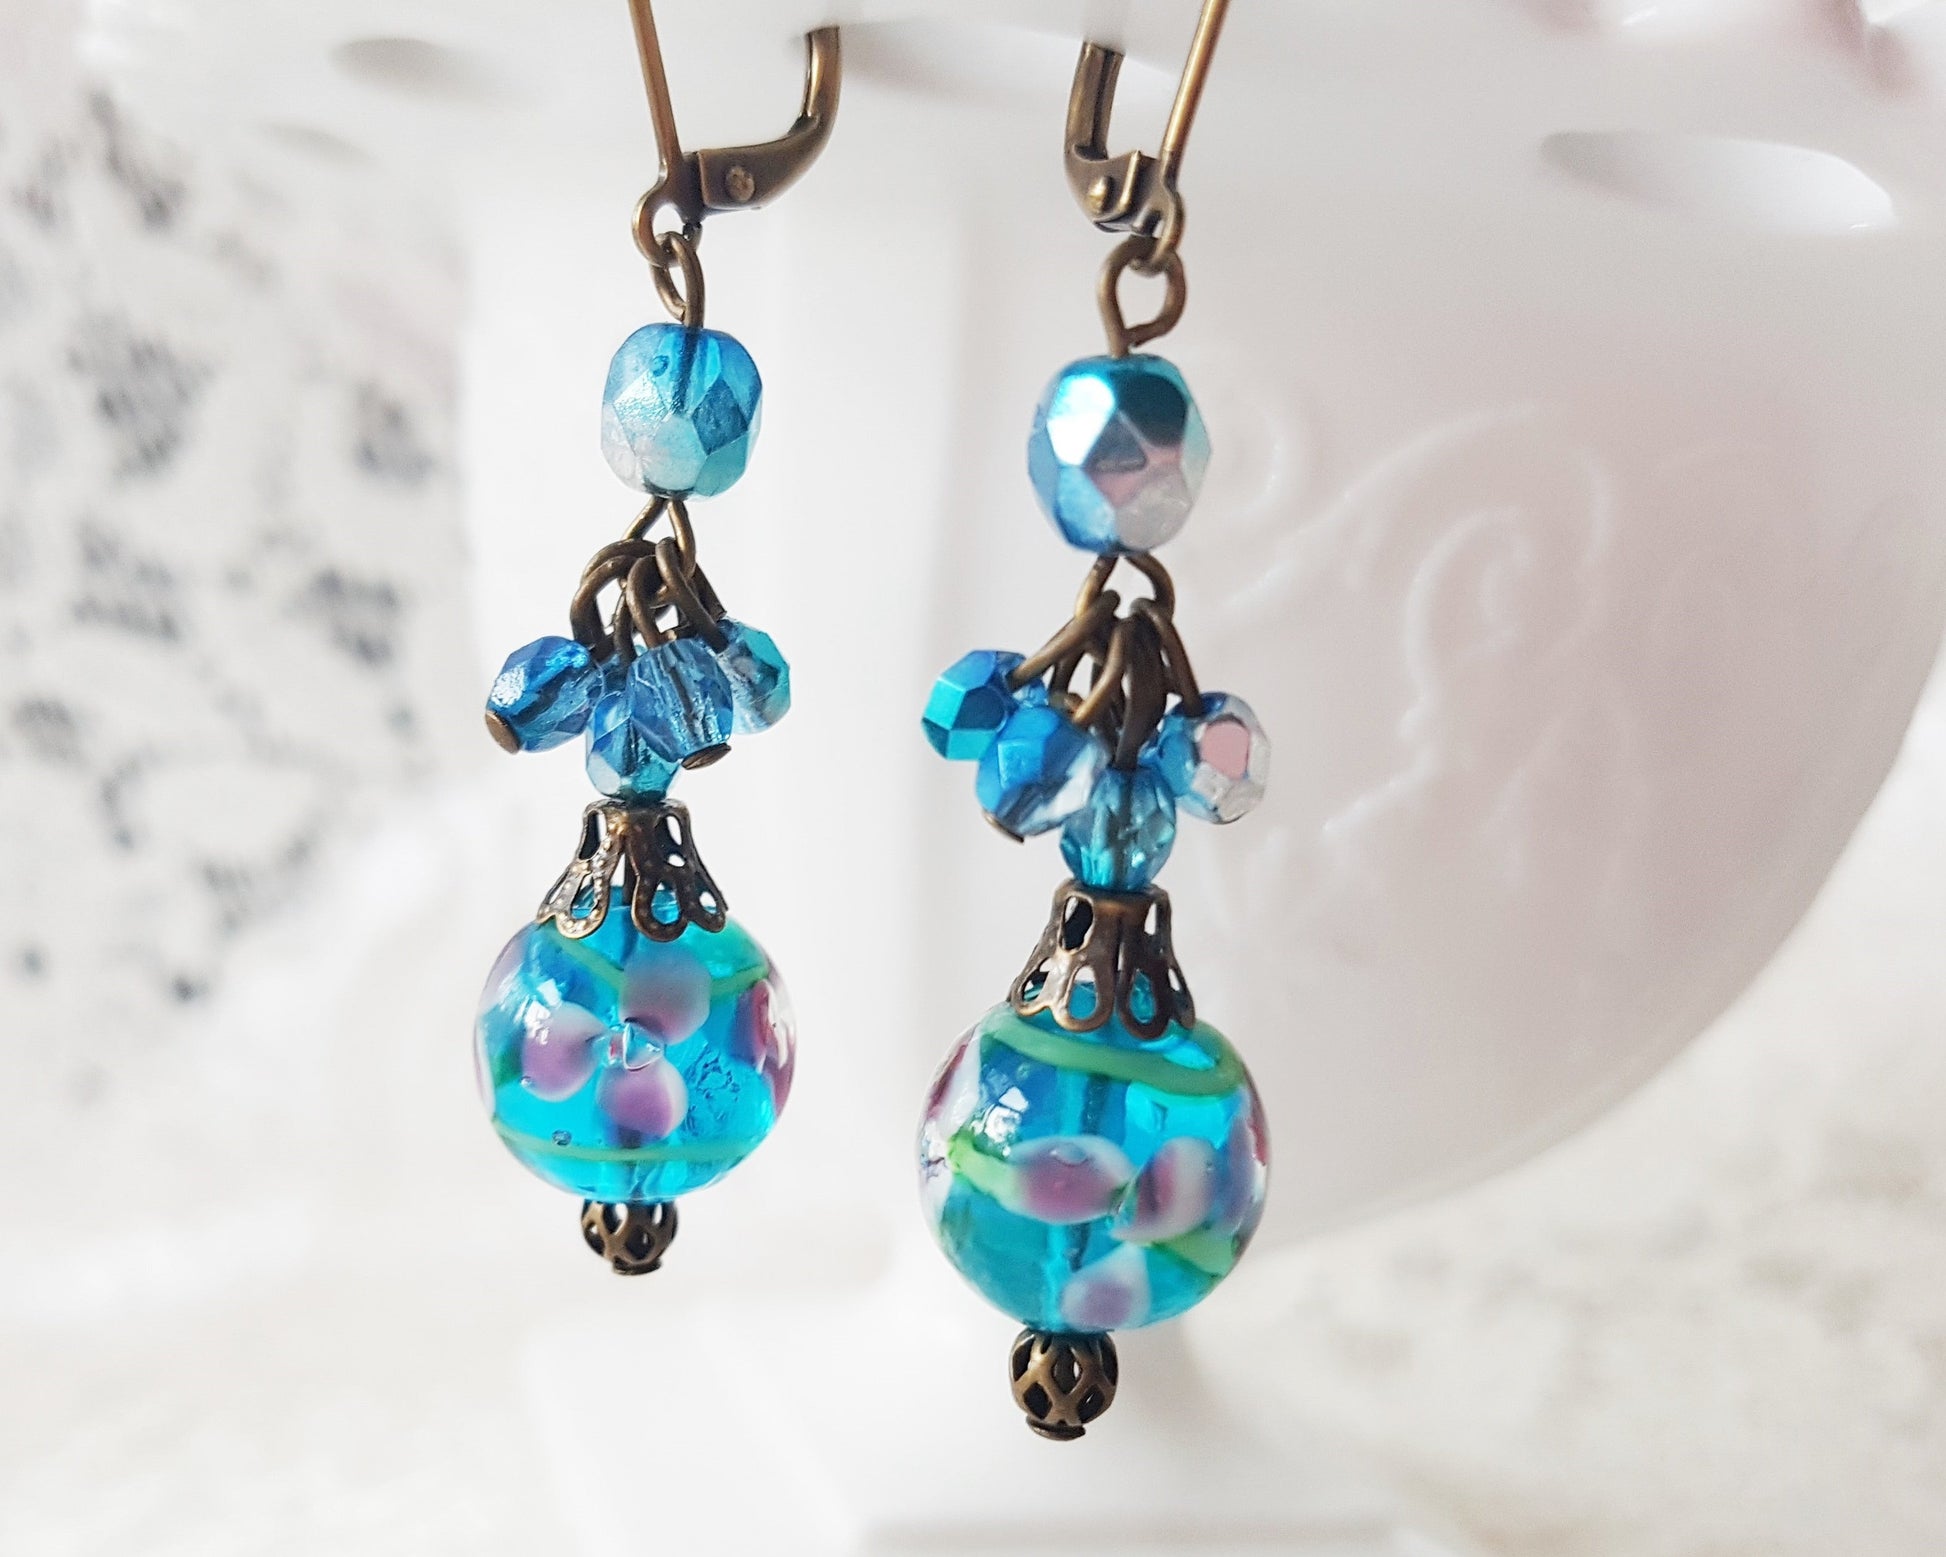 Long Blue Floral Vintage Inspired Earrings made with deep aqua blue beads, floral beads, and sparkly clusters above. The earring dangle on white vase on white lace